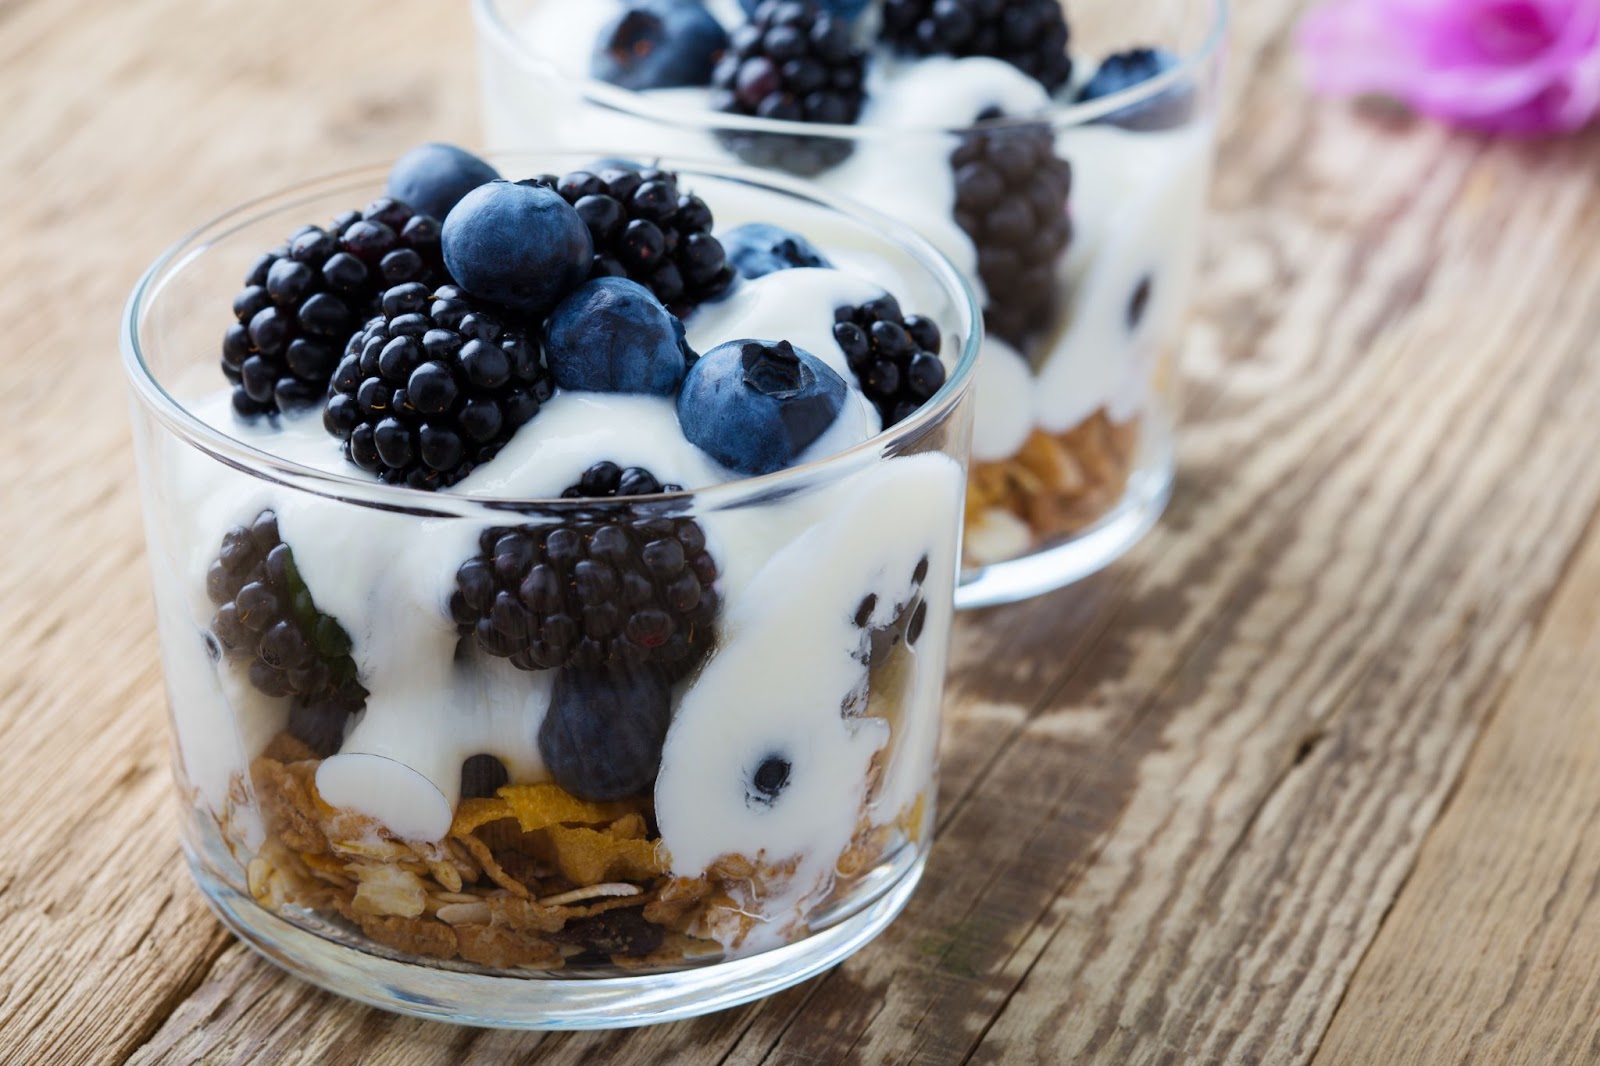 Greek yogurt in a glass mixed with berries and granola